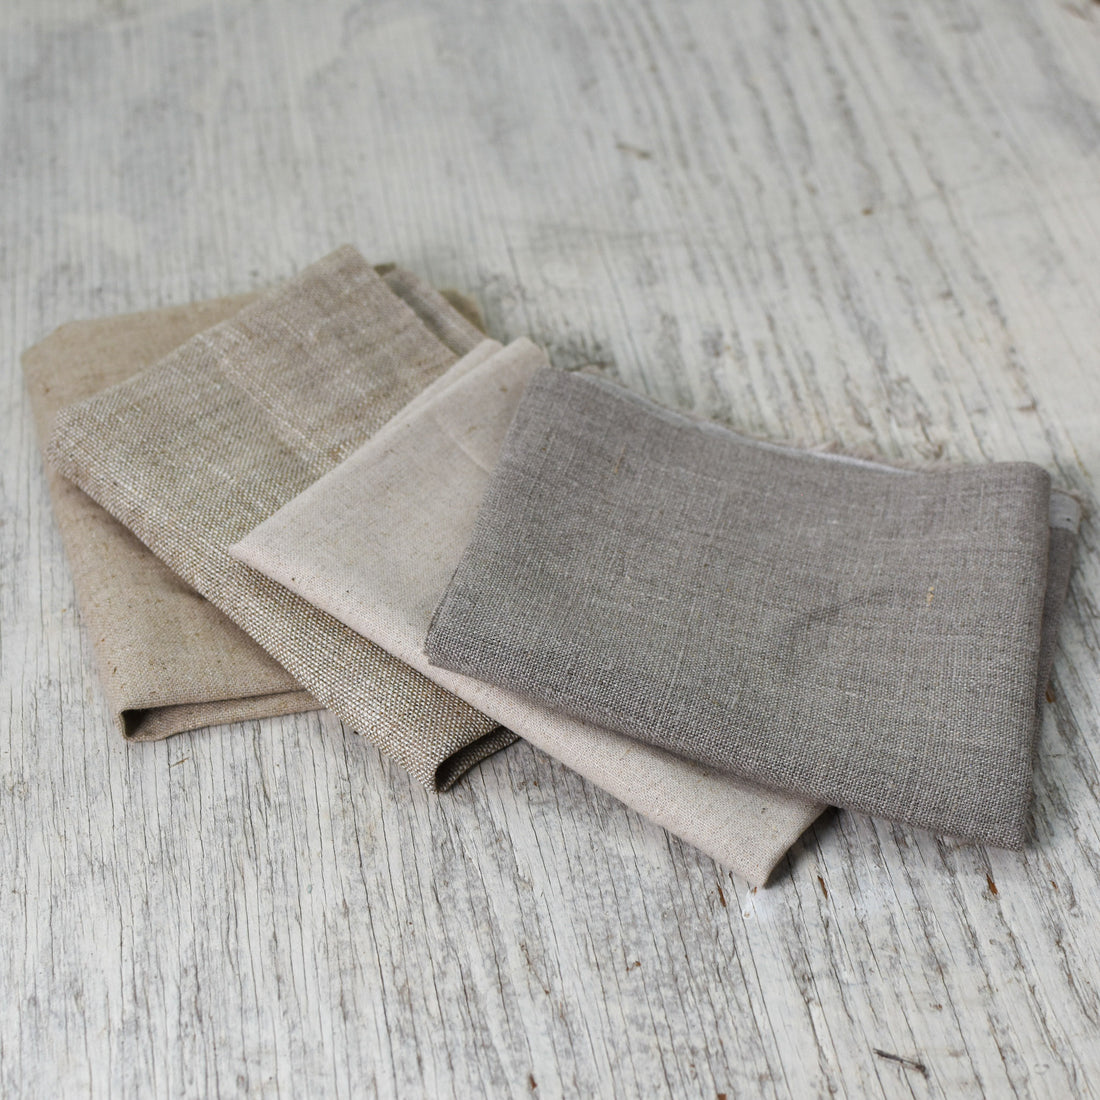 four pieces of folded natural brown linen fabric laid out in a fan shape to show variations in the colors and textures of each.